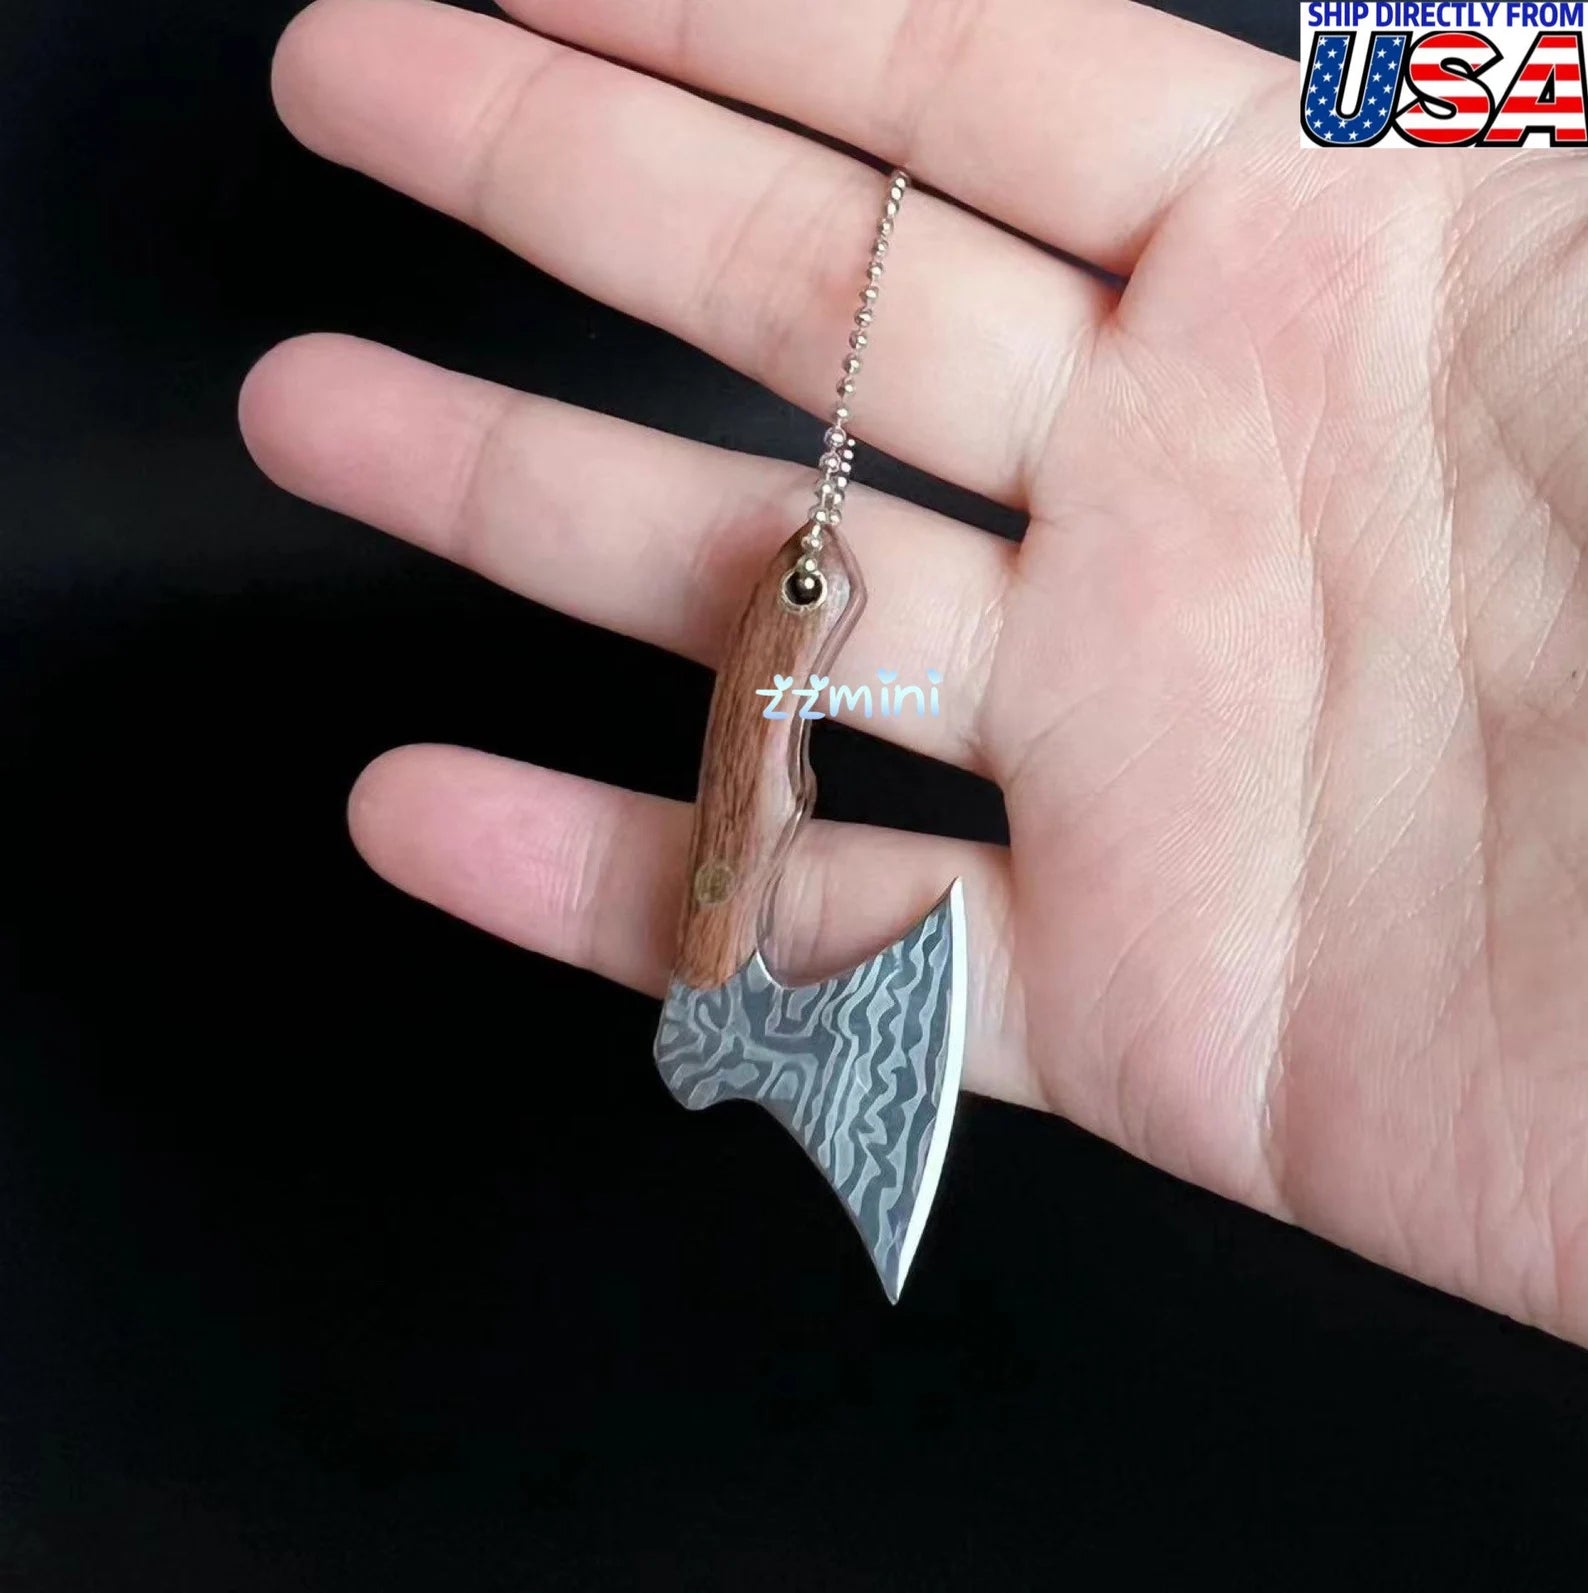 World Smallest Real Miniature Tiny Working Pocket Damascus Steel Axe Knife With Leather Sheath Pendant Keychain Tool